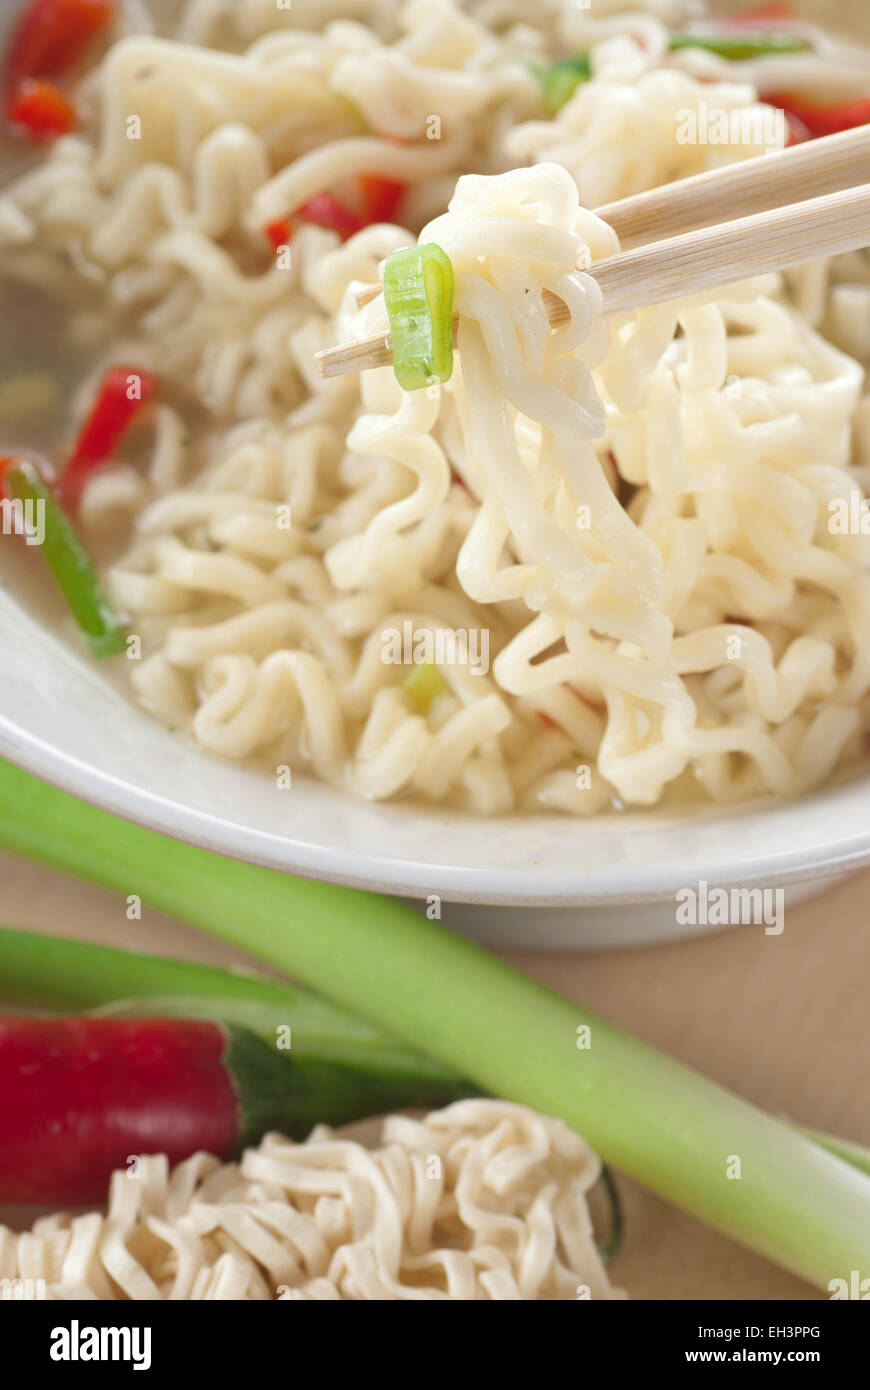 Noodle soup with spring onion and red chili pepper. Stock Photo